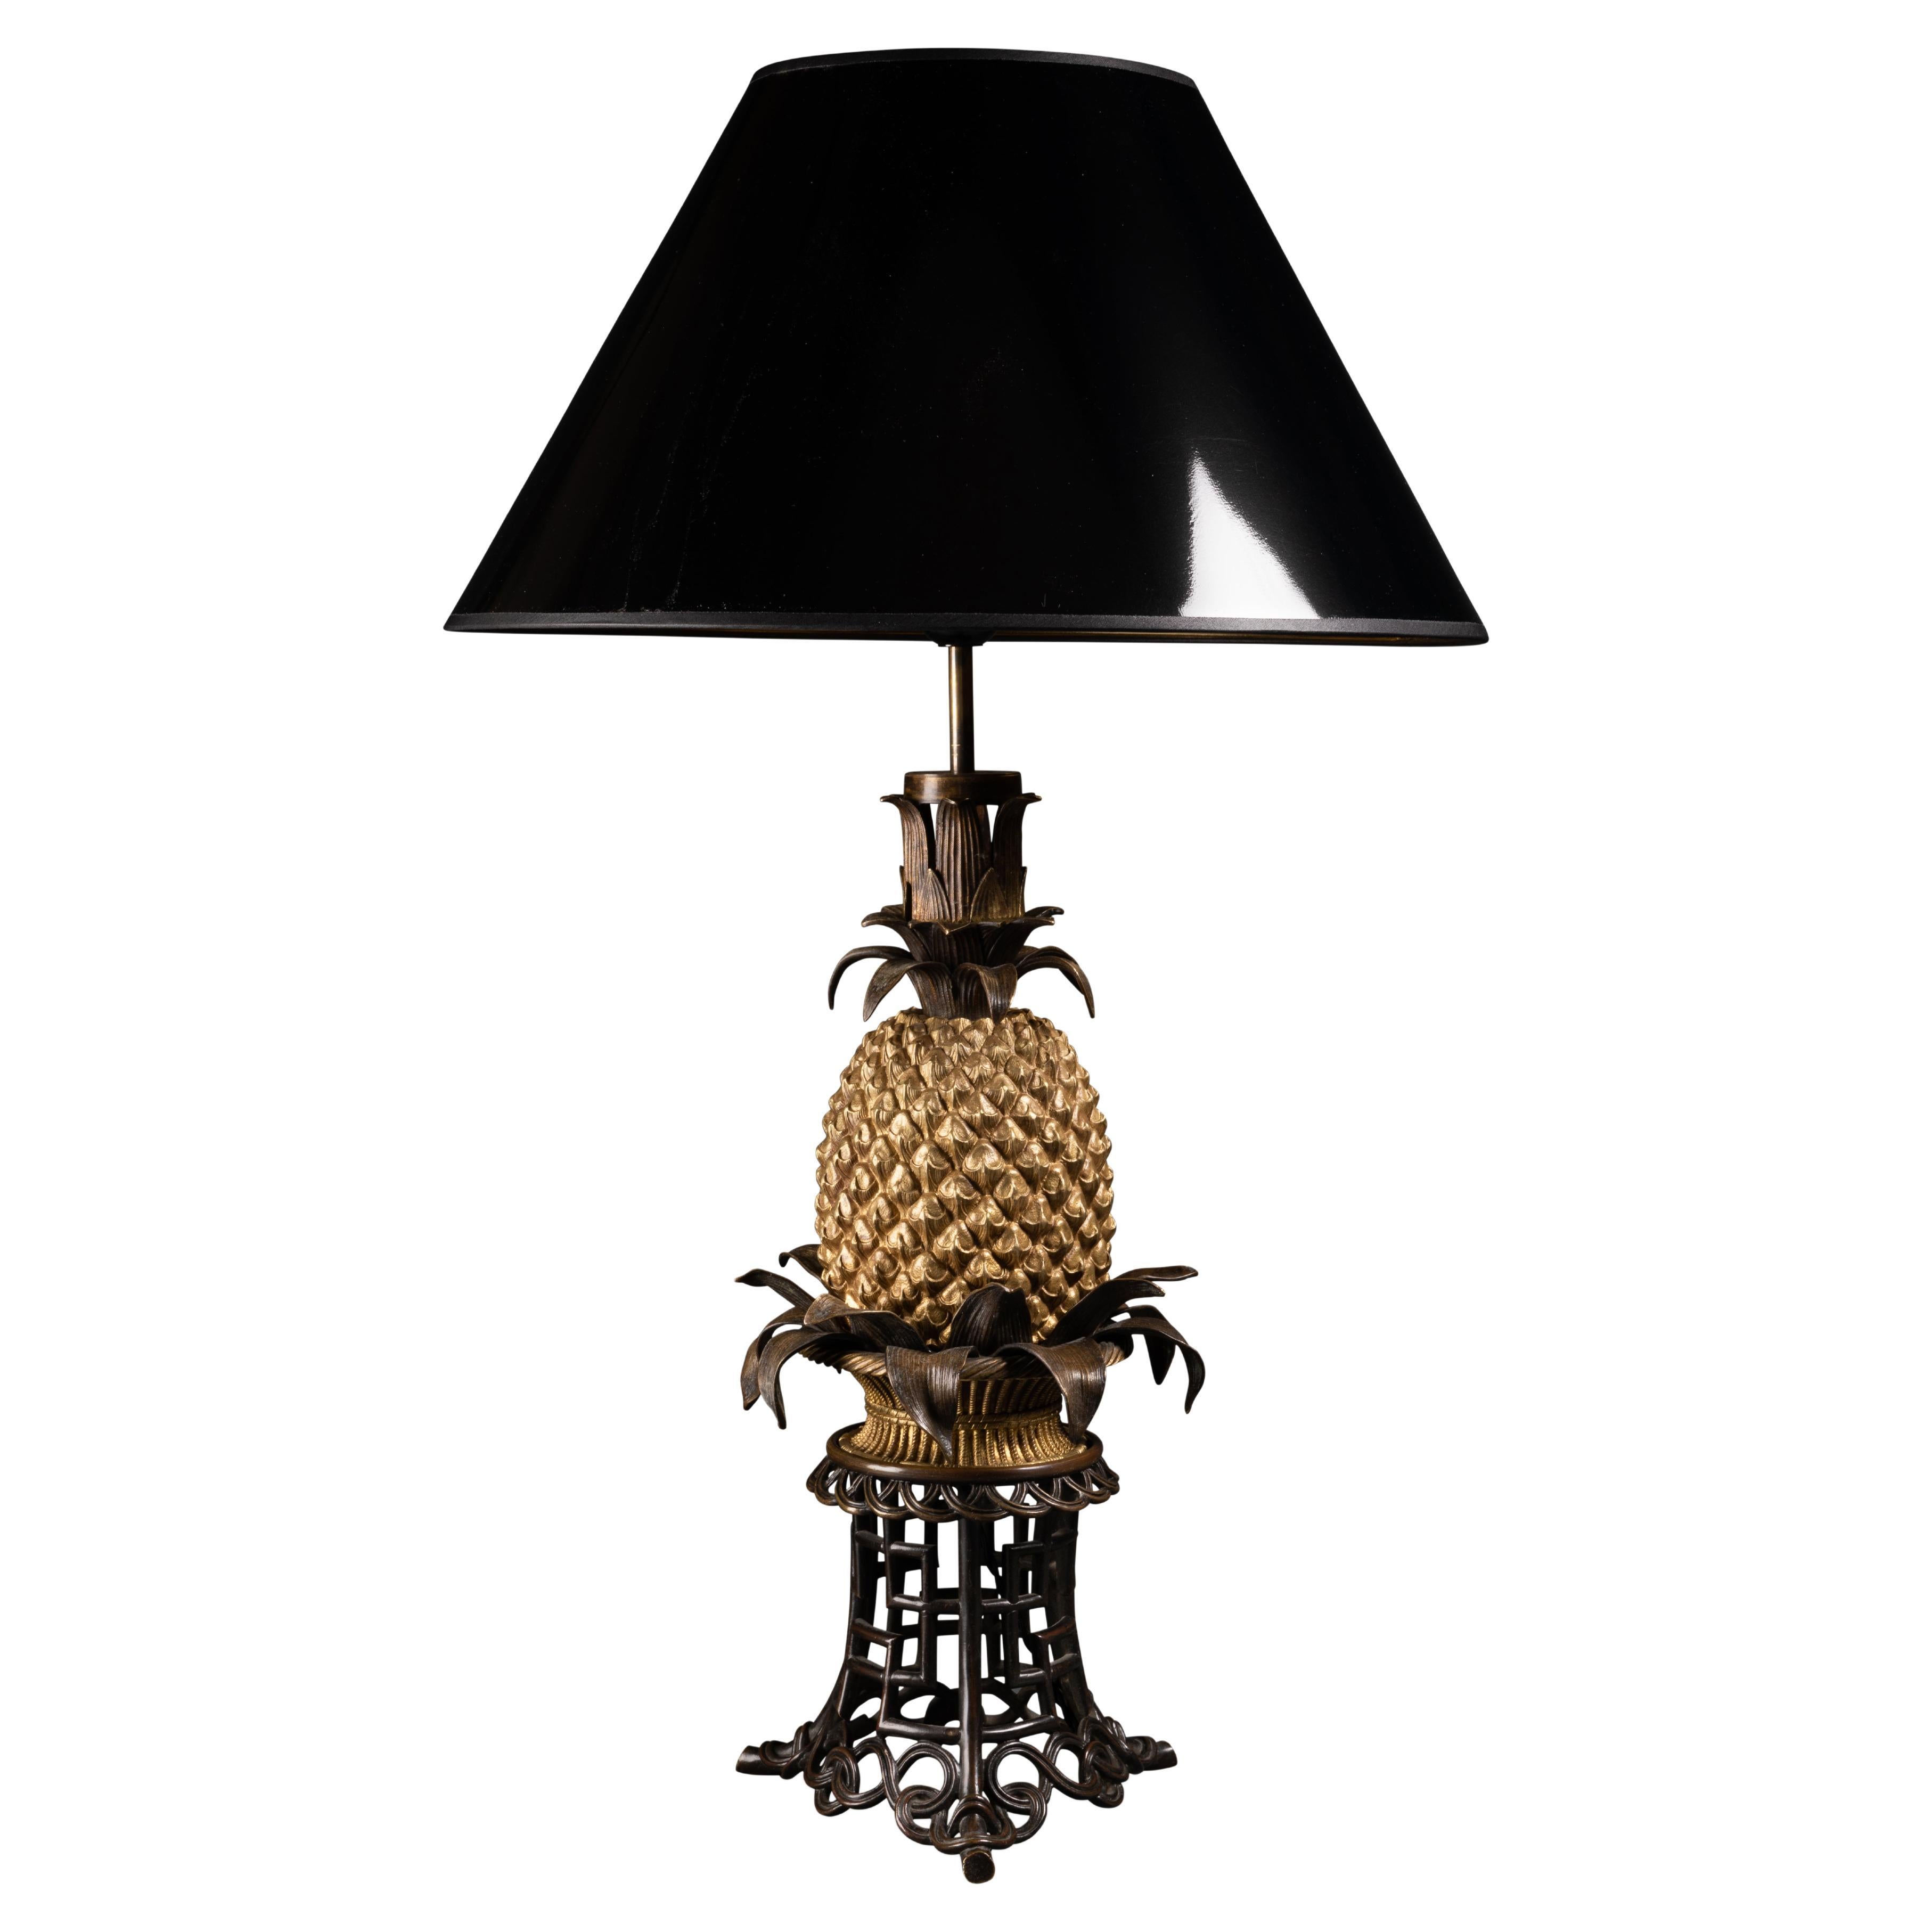 Very Rare Pineapple Lamp on a Wicker Basket with a Bronze Chinoiserie Base